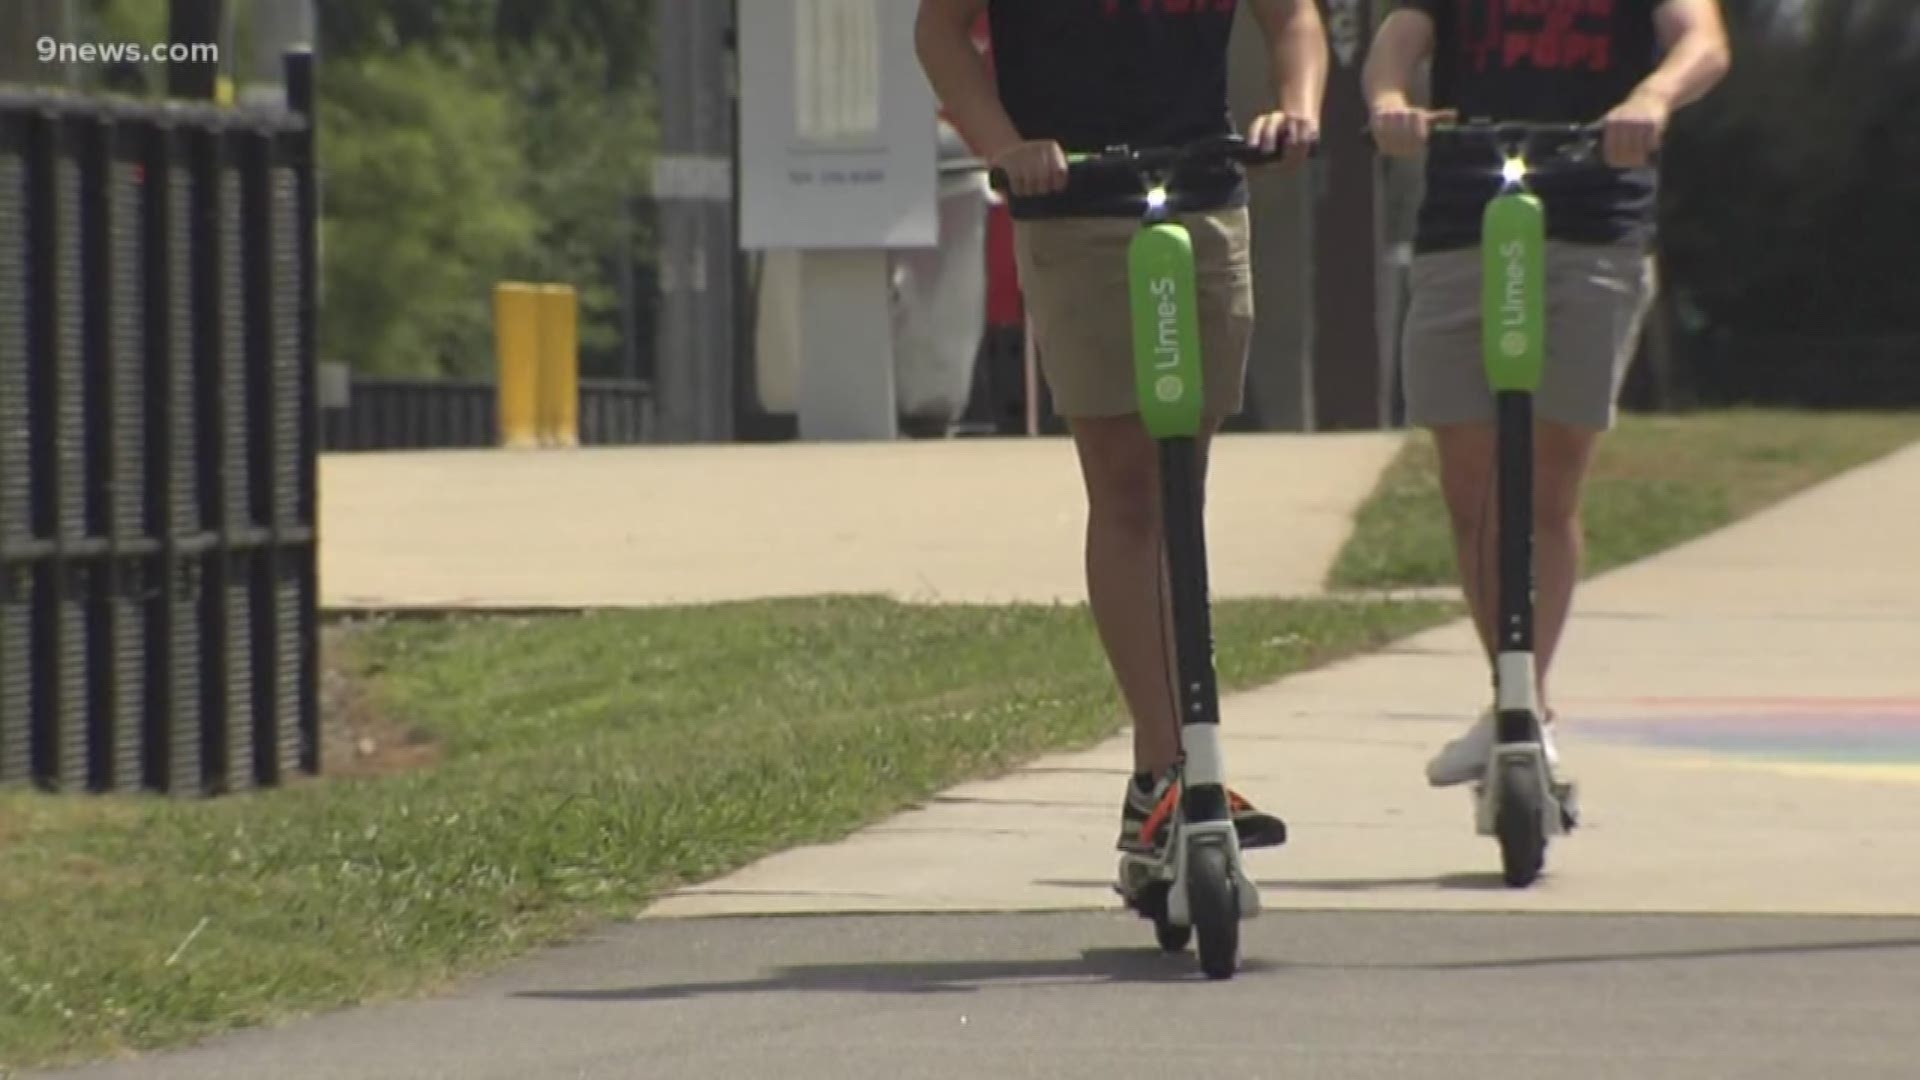 The Boulder city council put a moratorium in place to allow time to study the scooters.